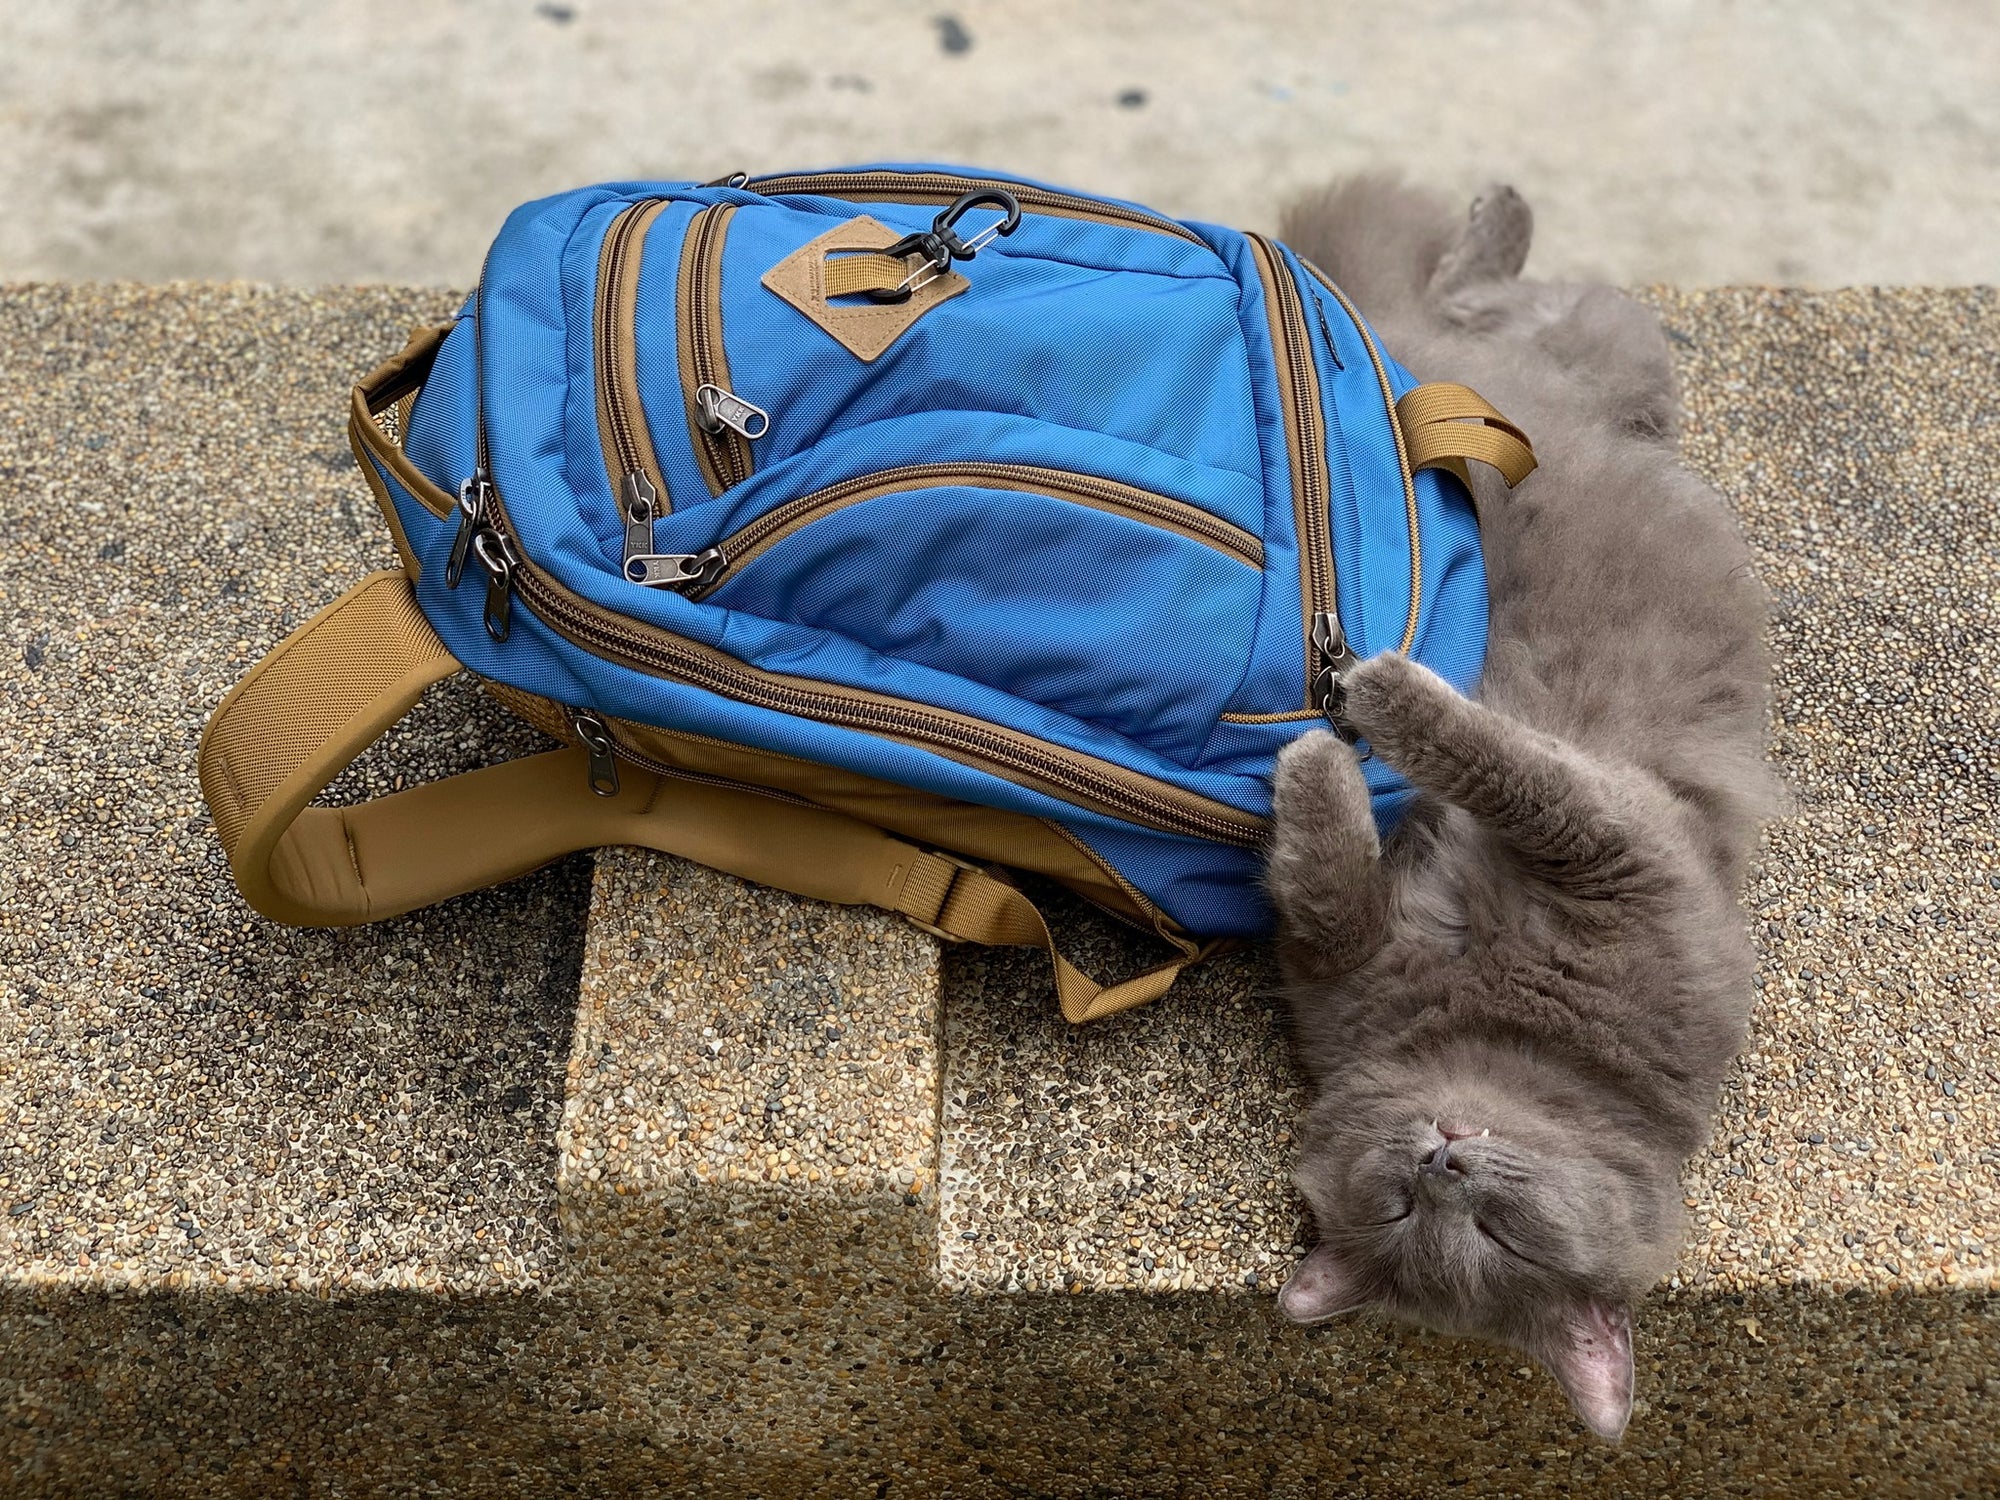 A grey cat curled around a Constellation Guide Edition Synik backpack.